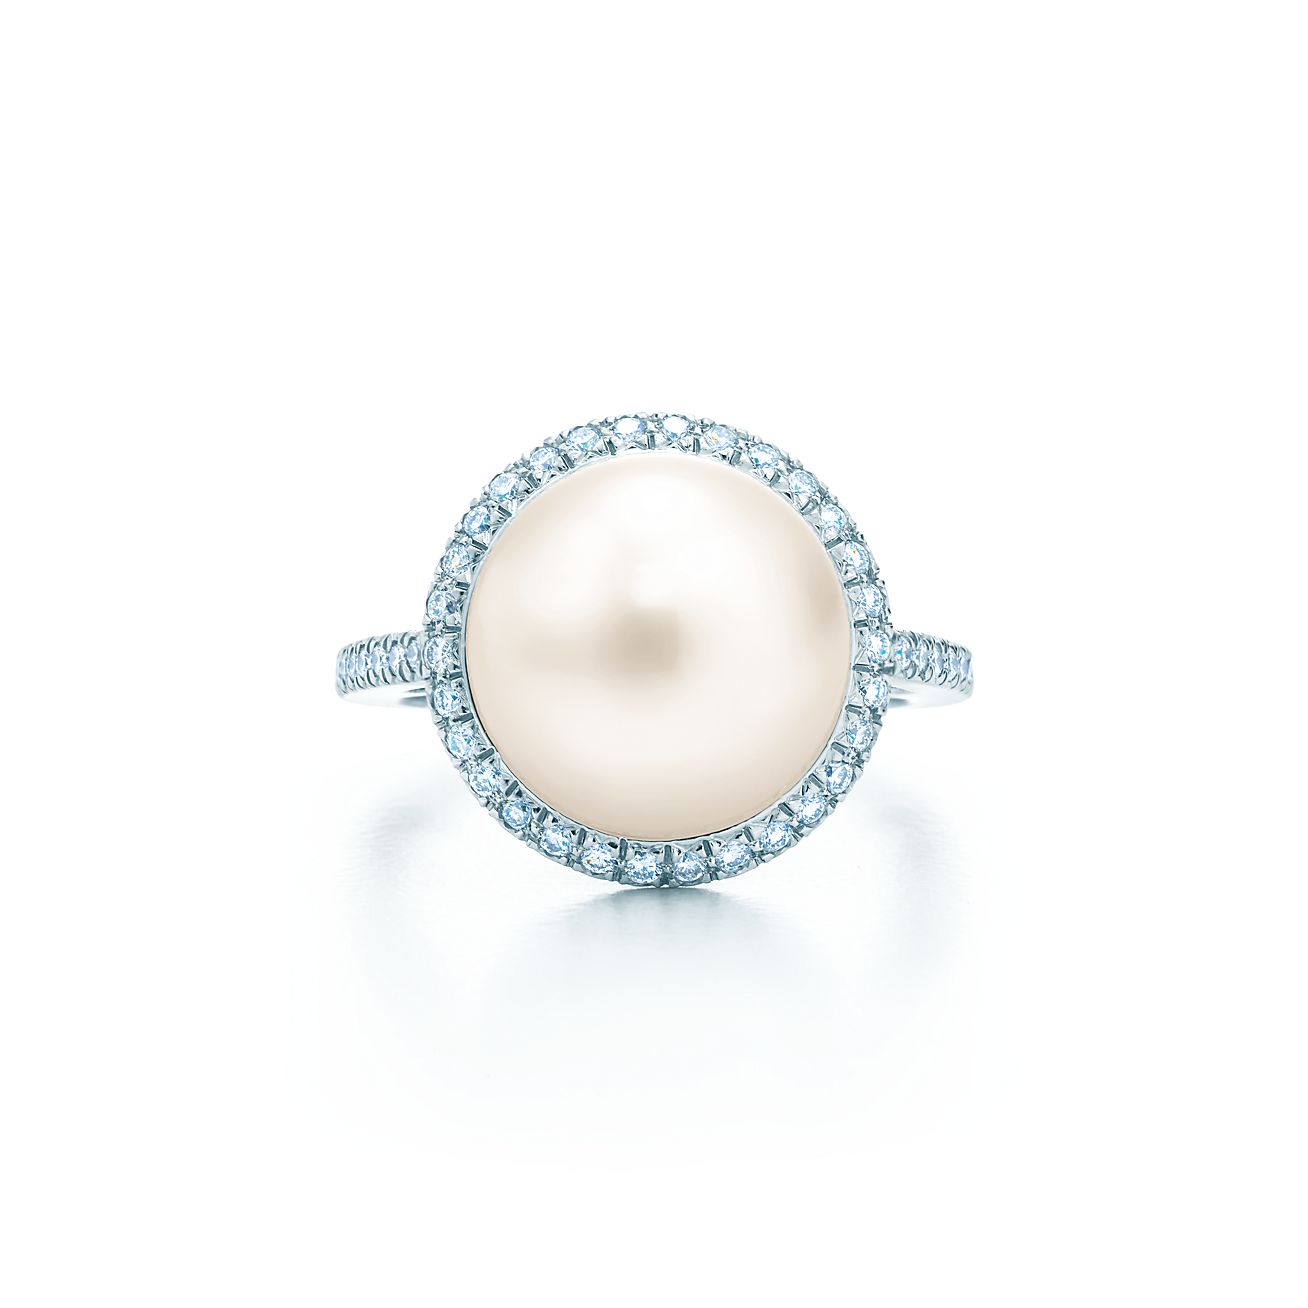 Tiffany South Sea Noble ring in 